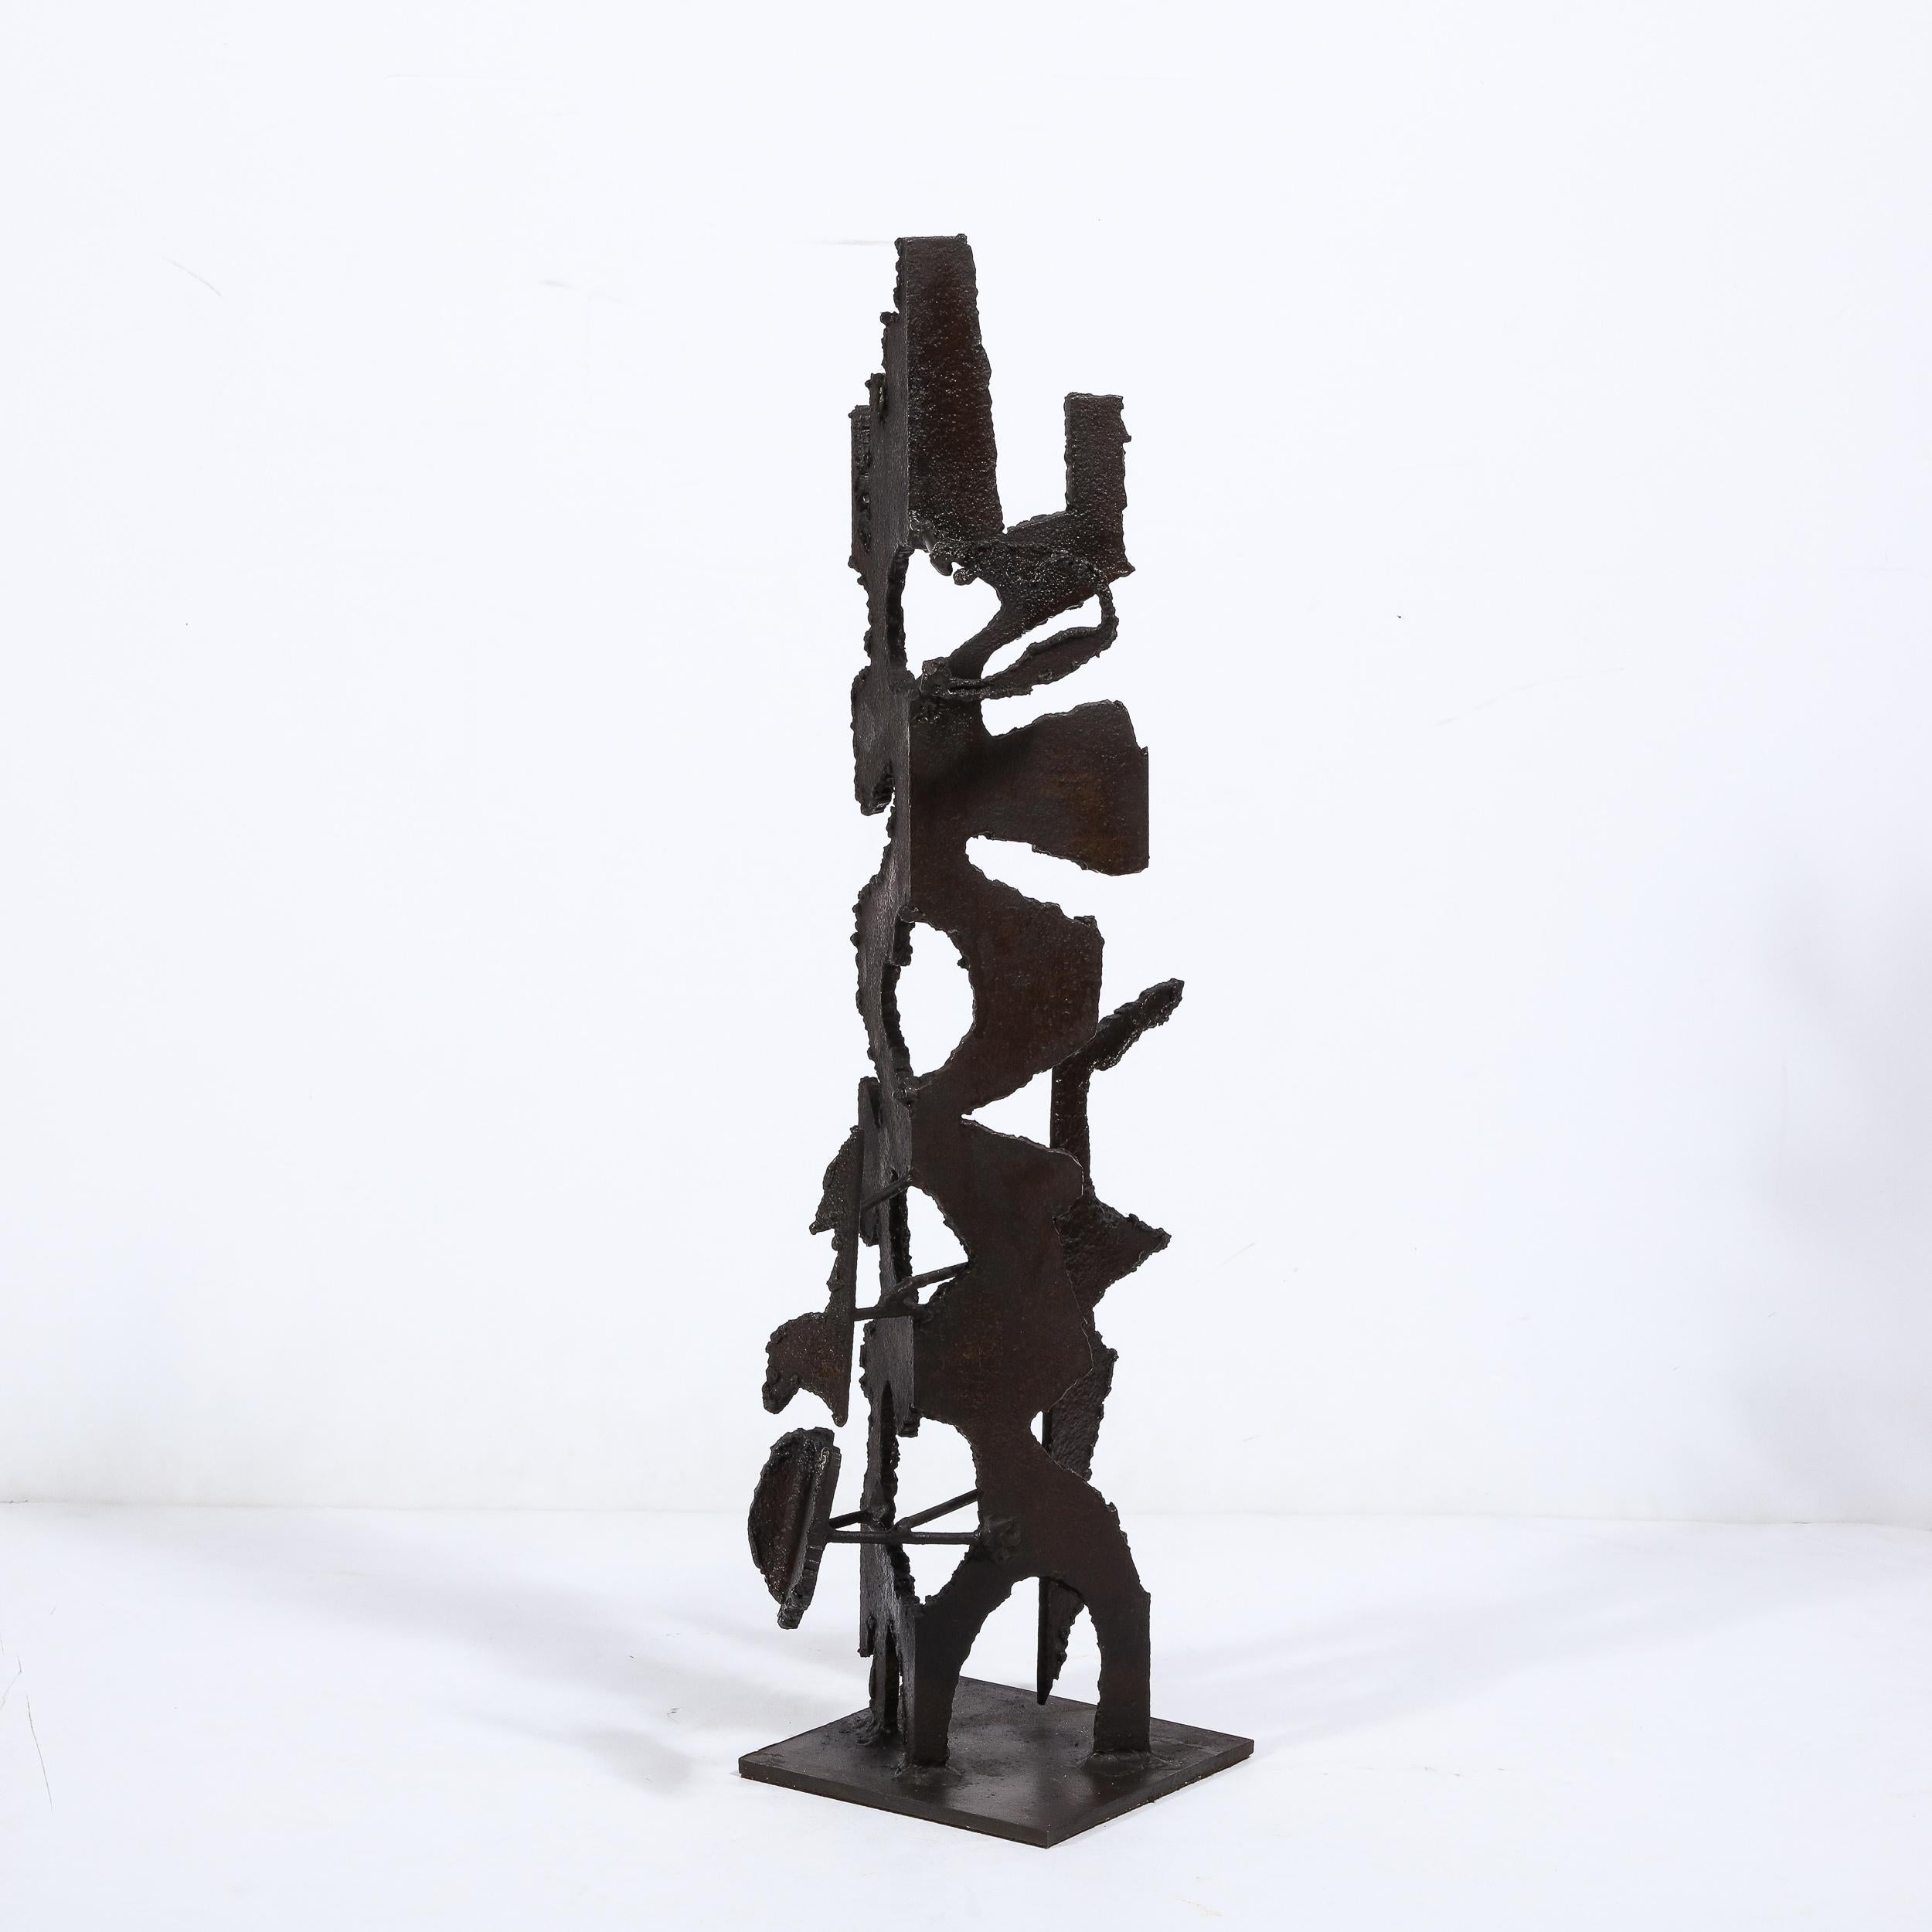 Brutalist Steel Sculpture in Oil and Waxed Finish by Jan Van Deckter In Excellent Condition For Sale In New York, NY